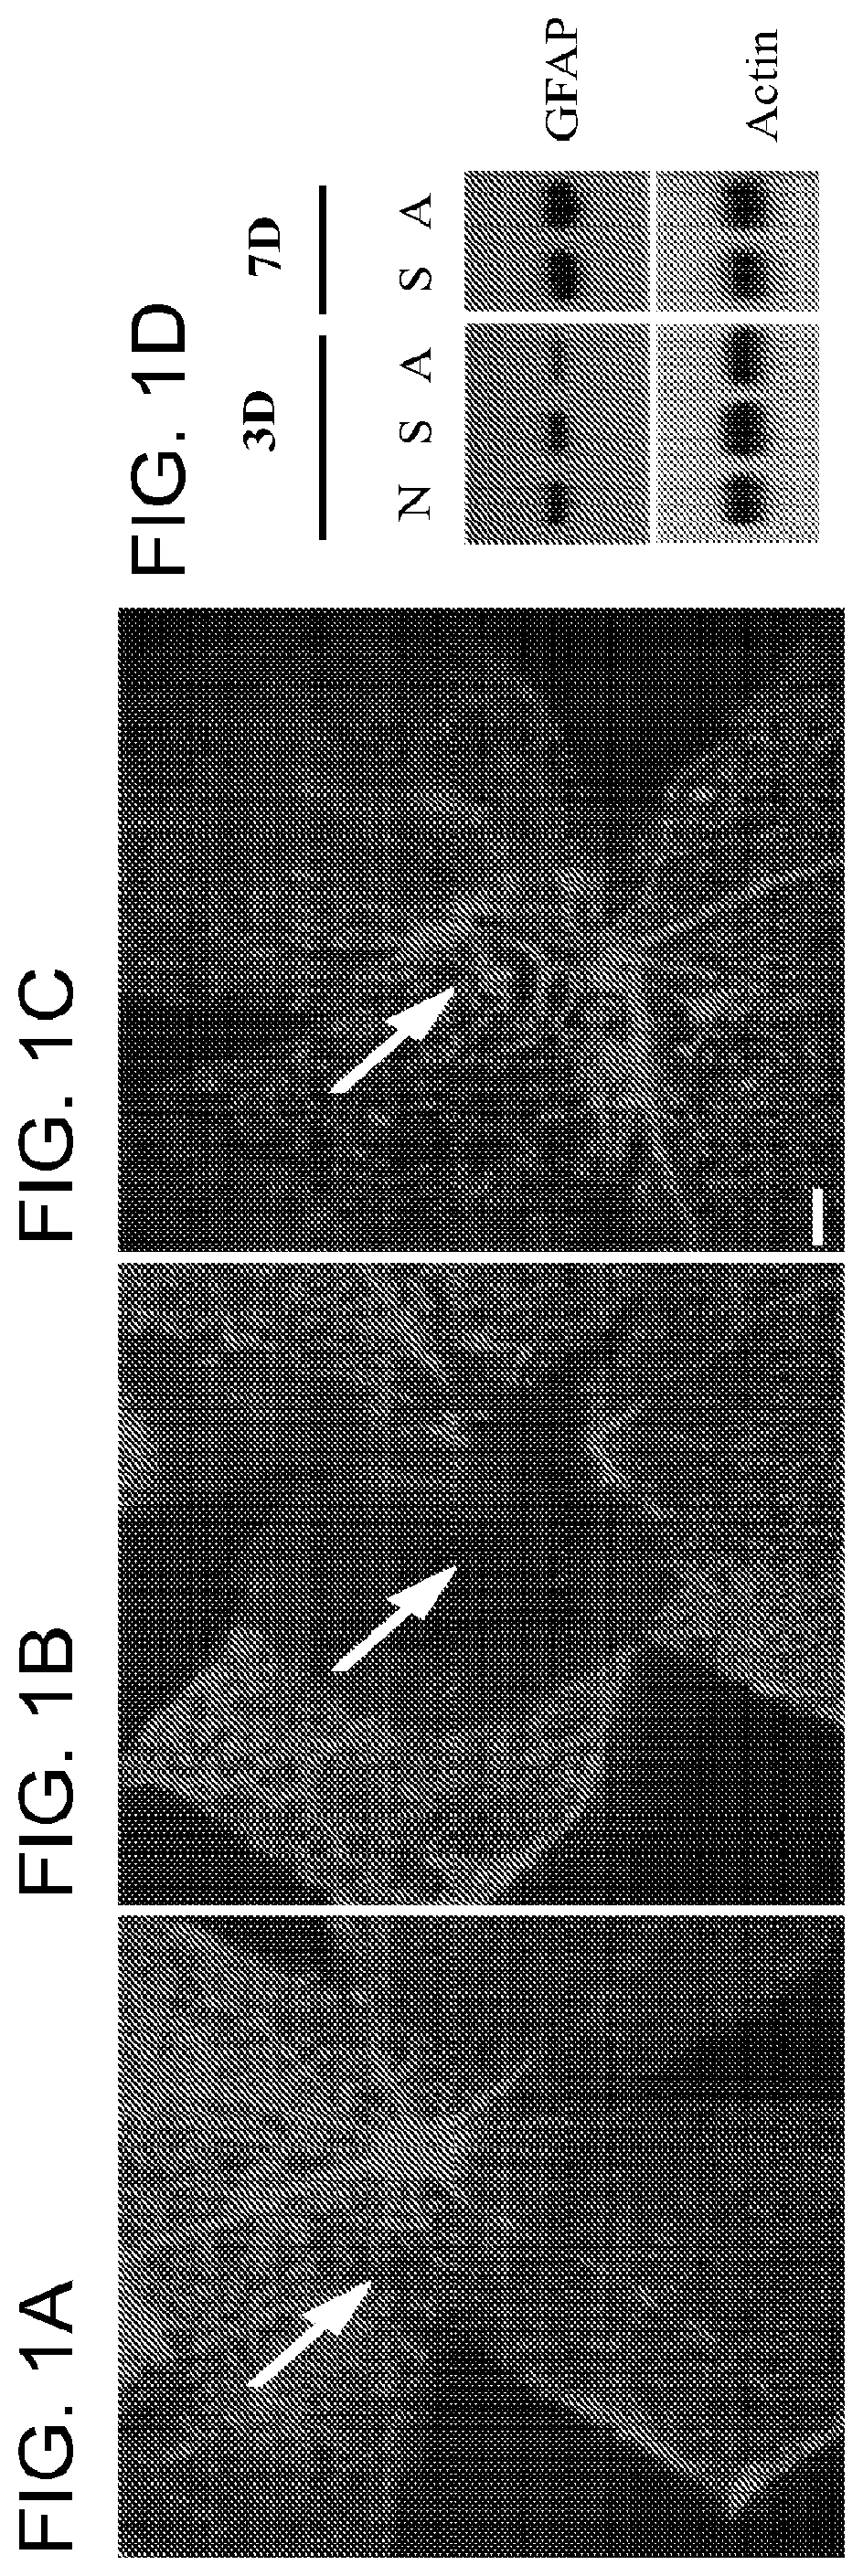 Alpha-aminoadipate for treatment of vision loss and restoring sight